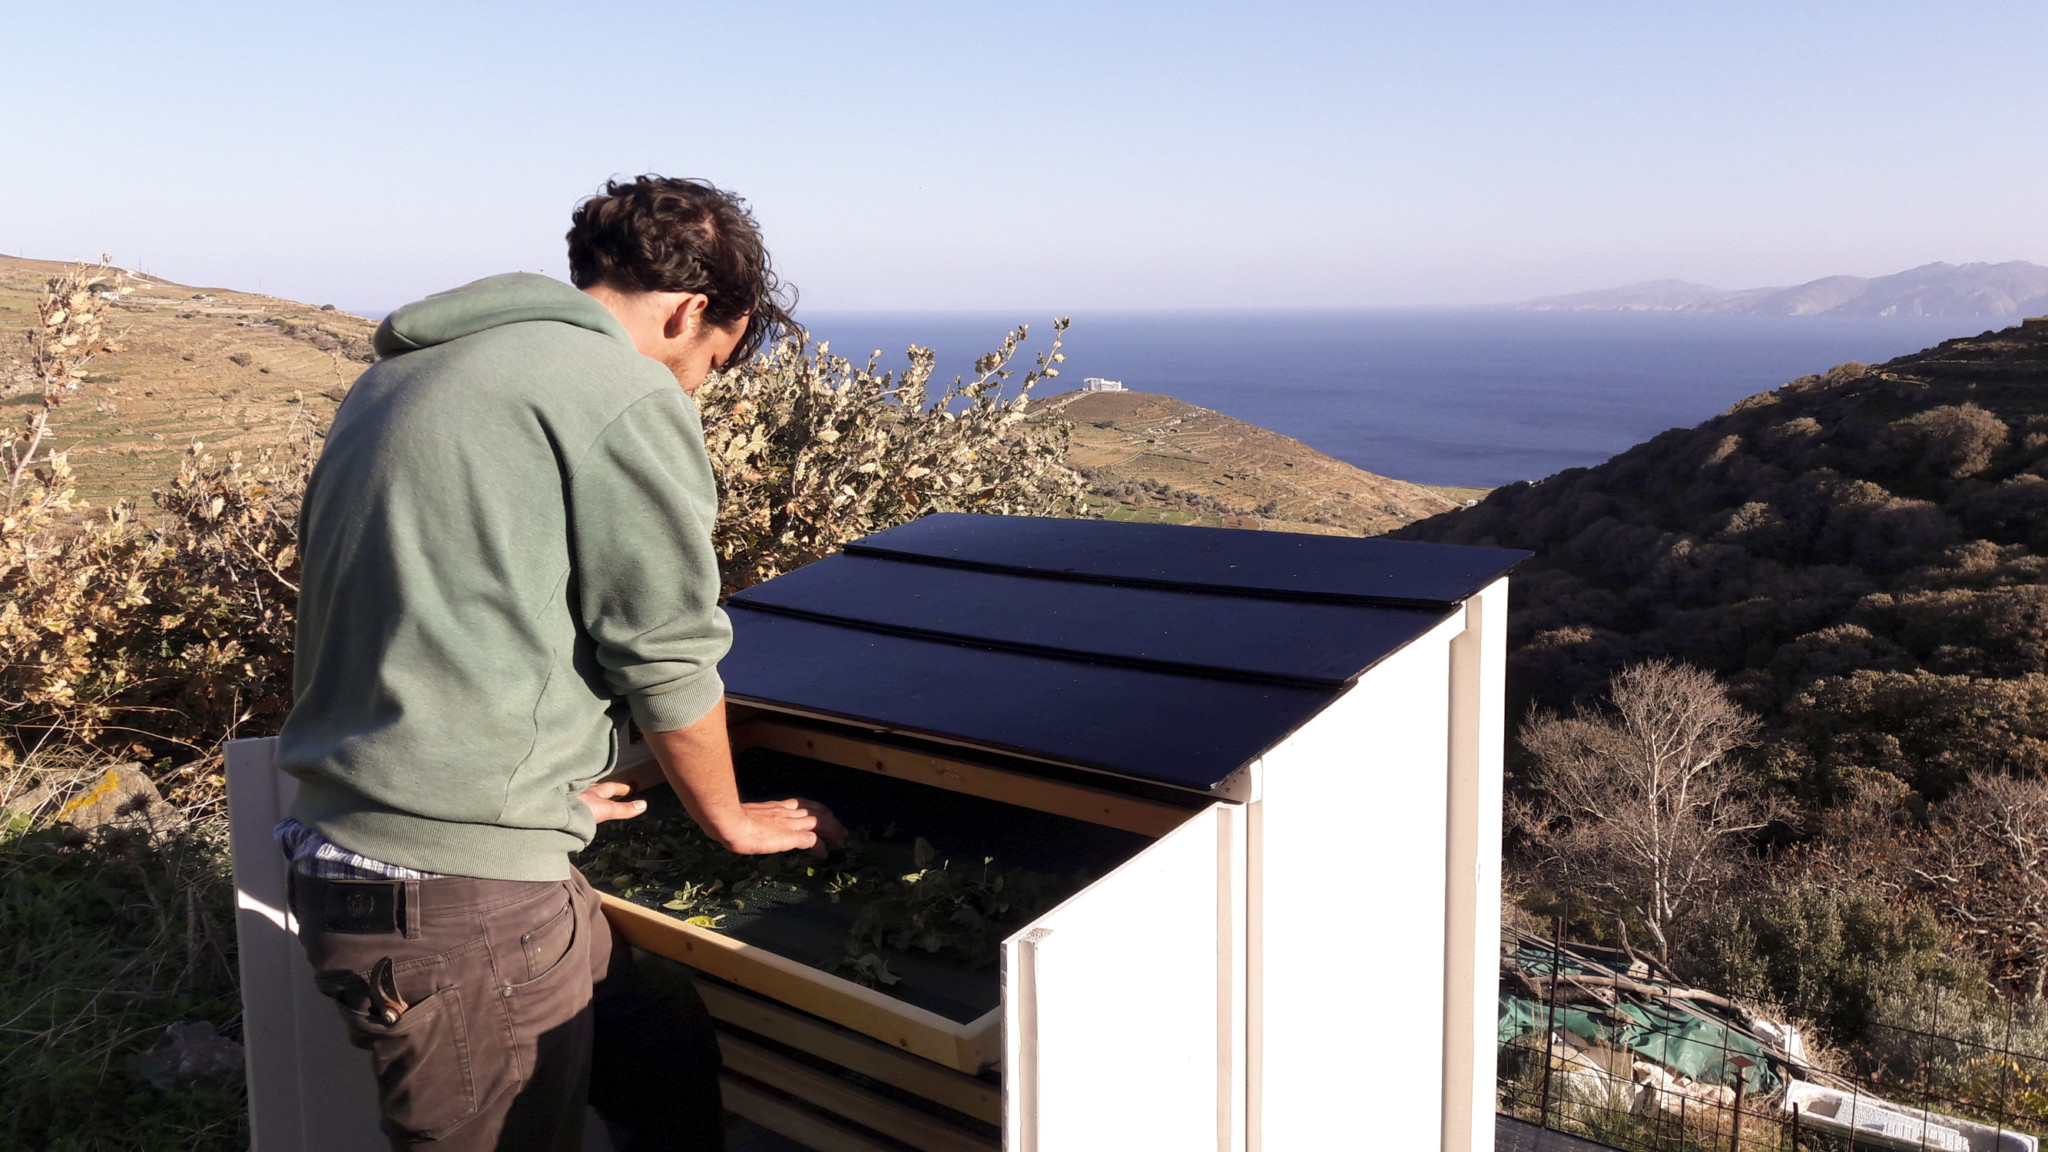 https://www.tinosecolodge.gr/cms/wp-content/uploads/2017/12/tinos-ecolodge-solar-herb-dryer-dehydrator-2017-_32.jpg